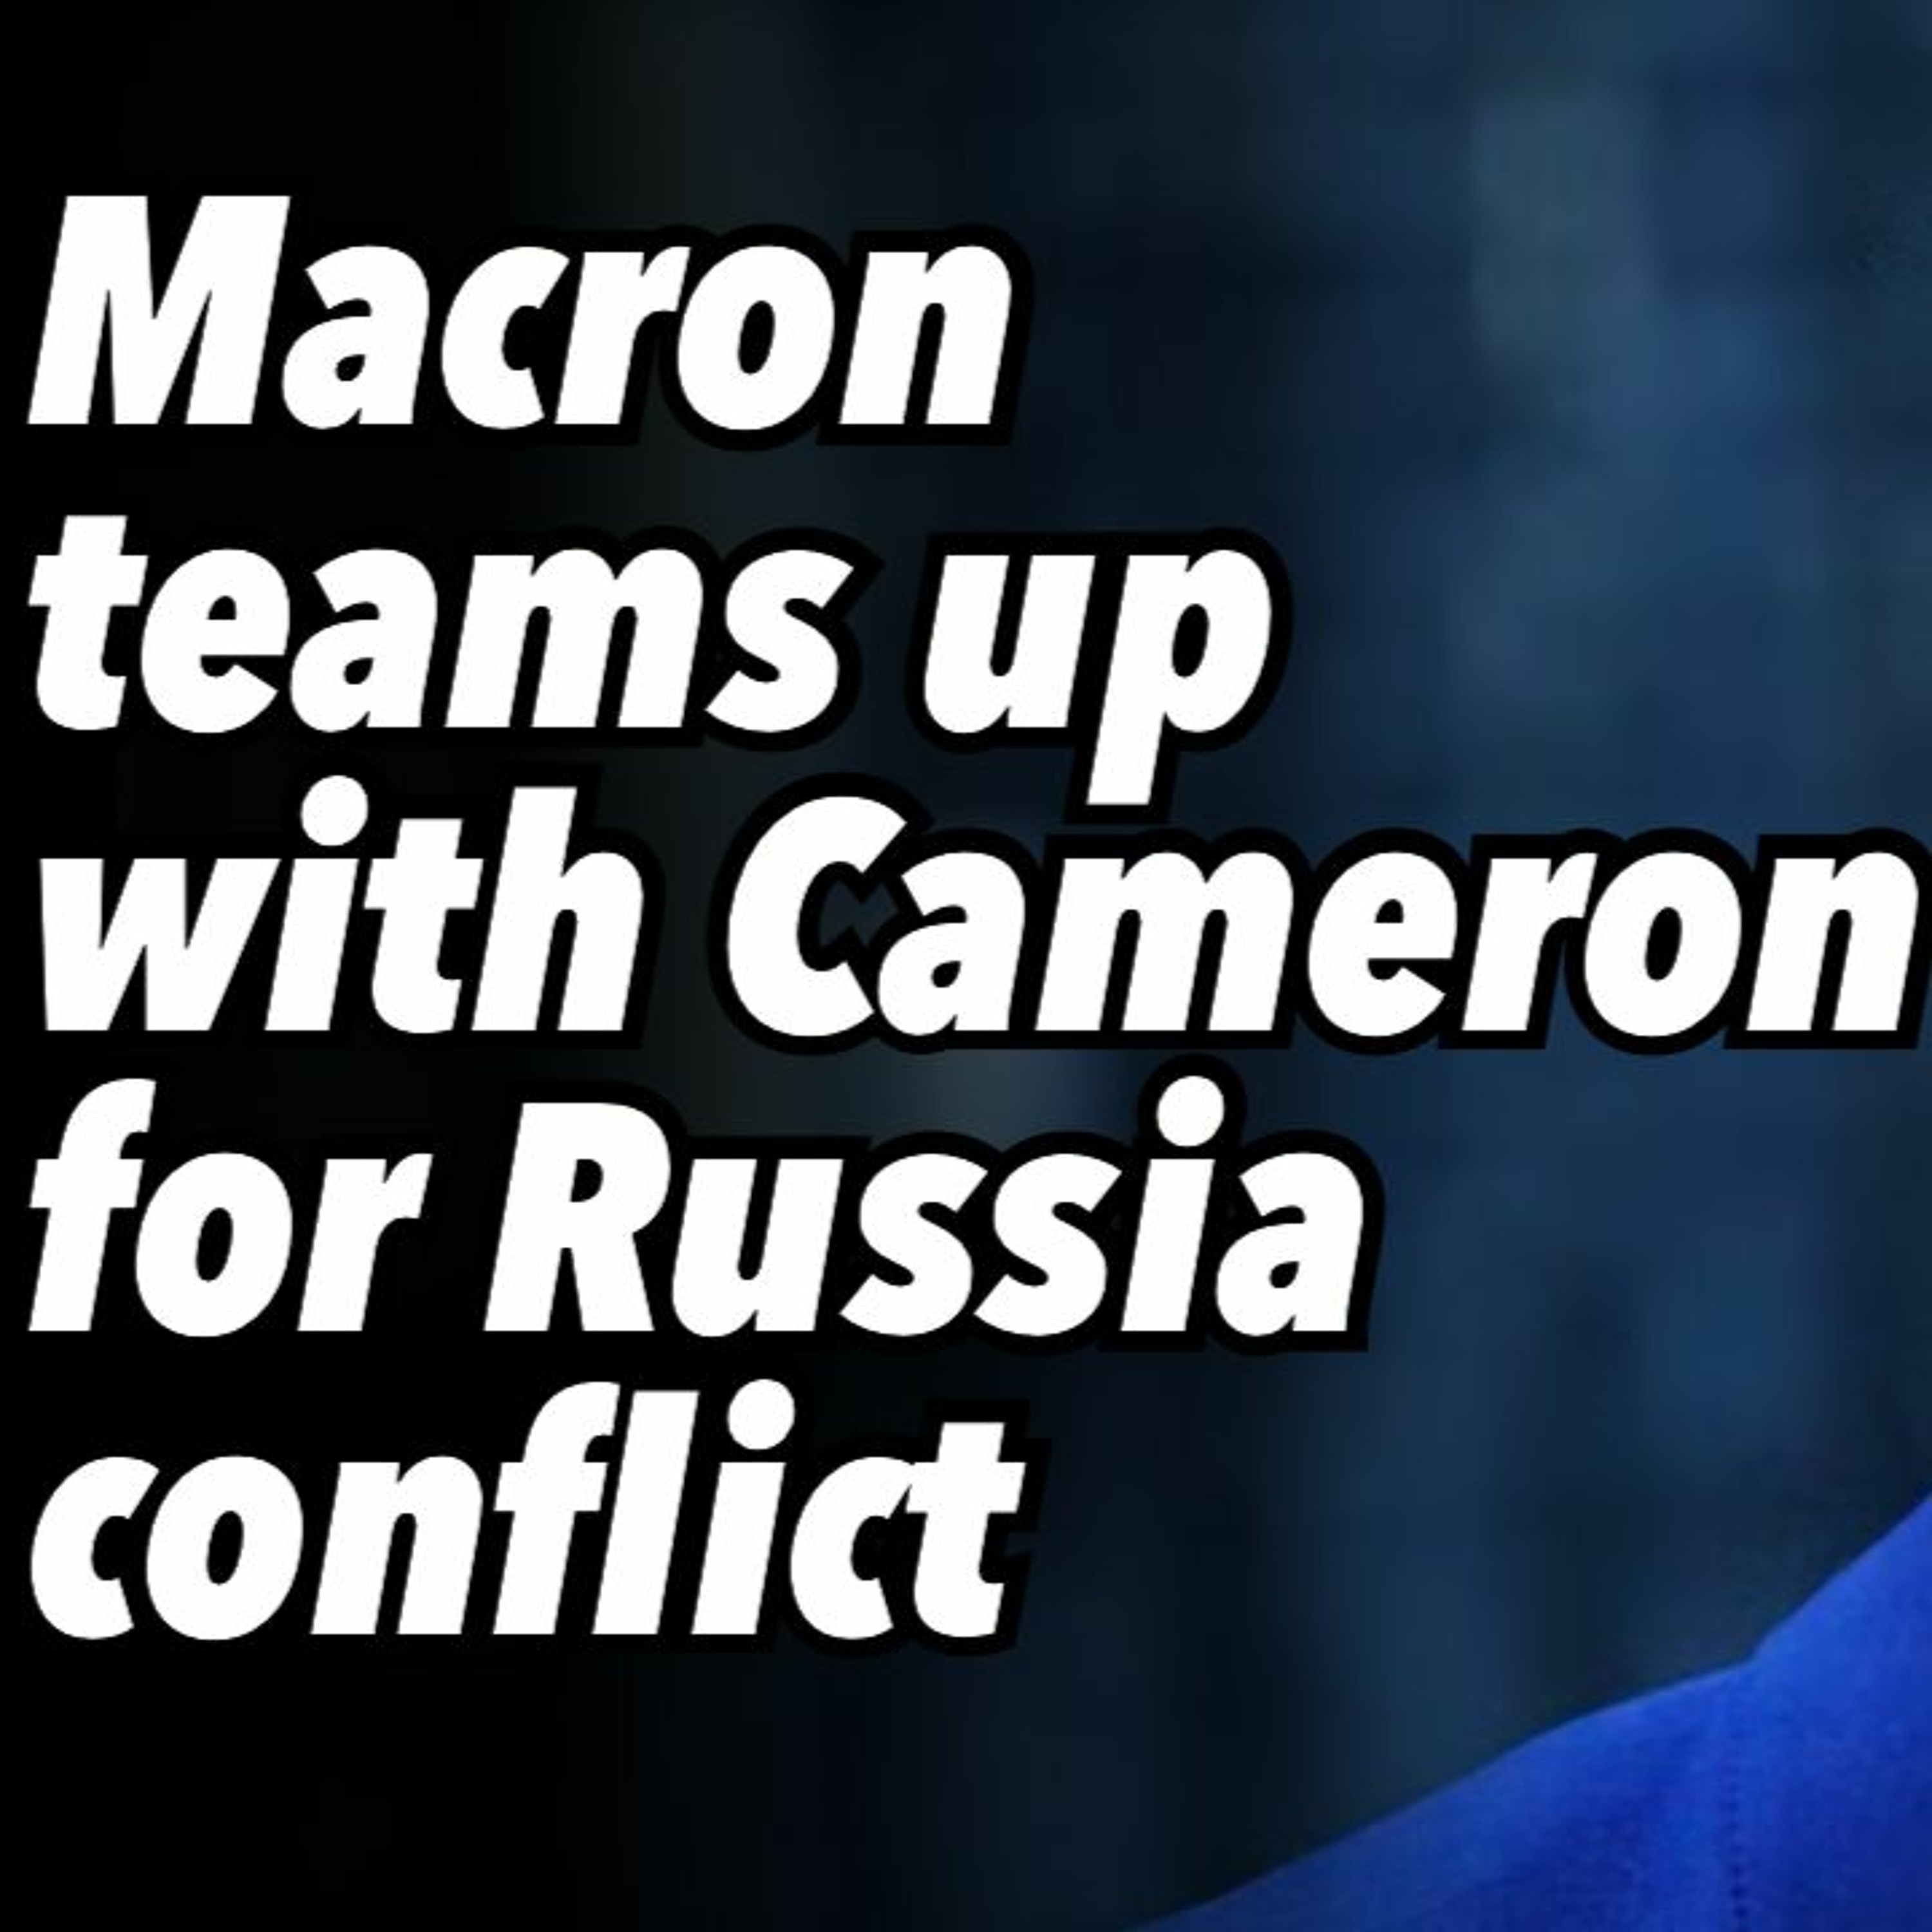 Macron teams up with Cameron for Russia conflict